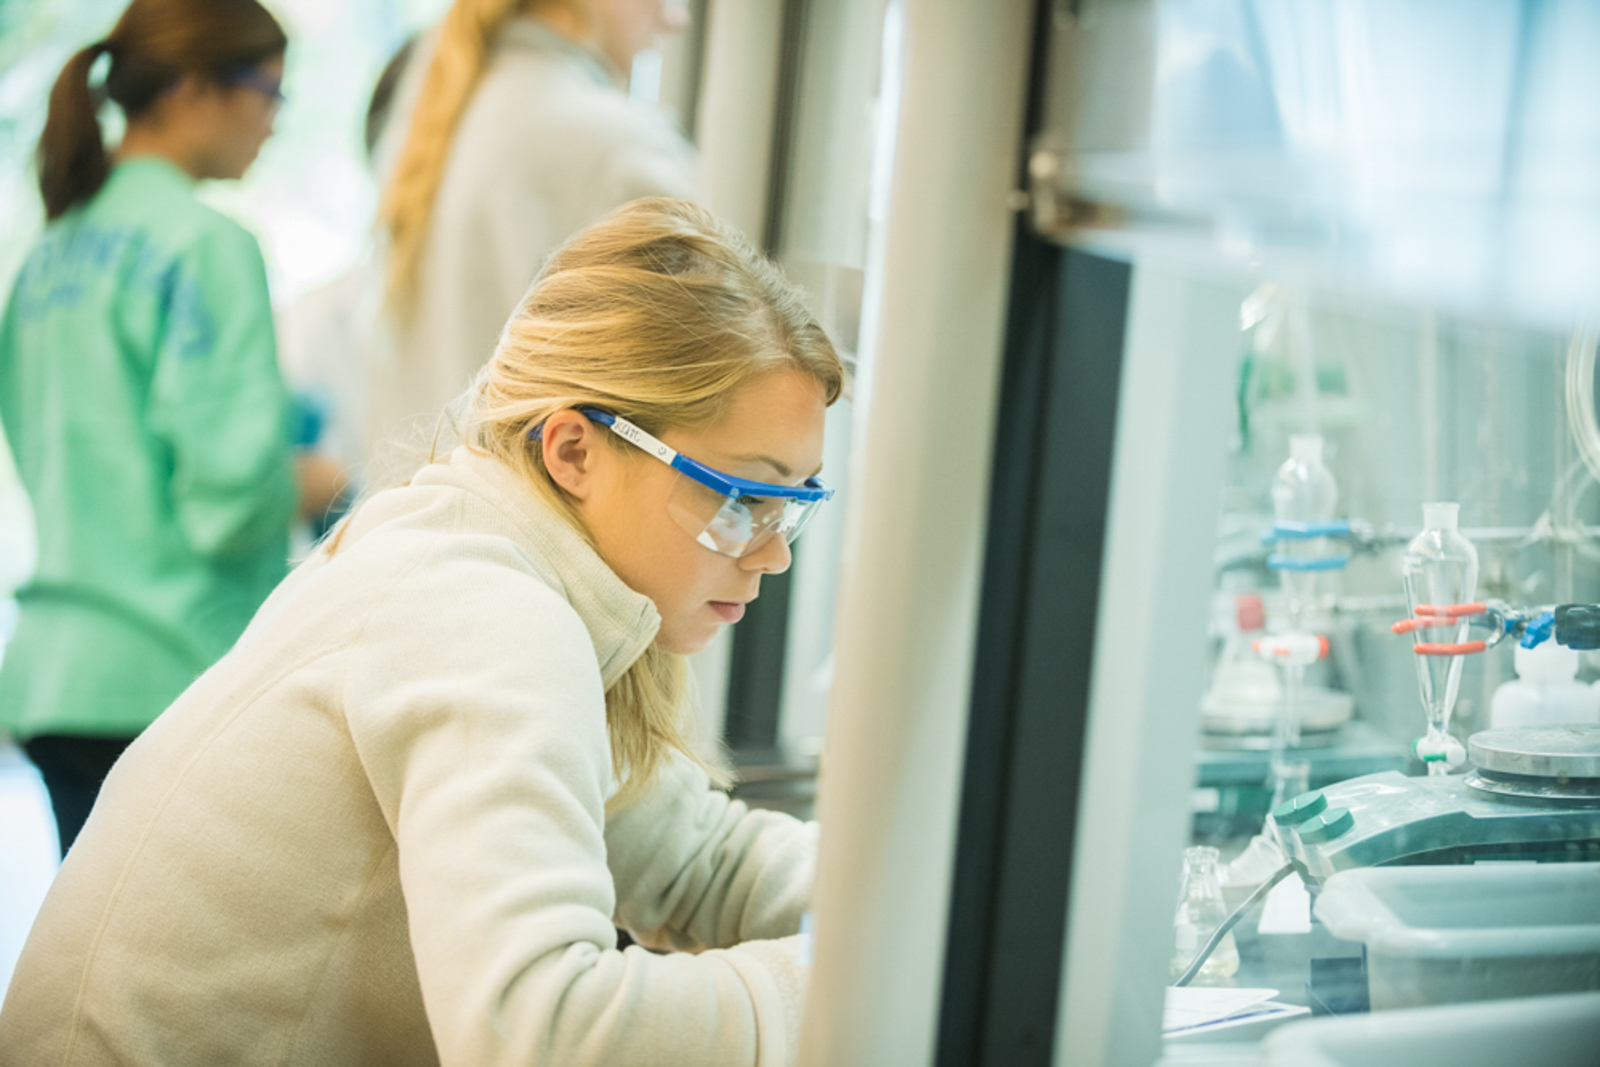 Student working in lab wearing goggles